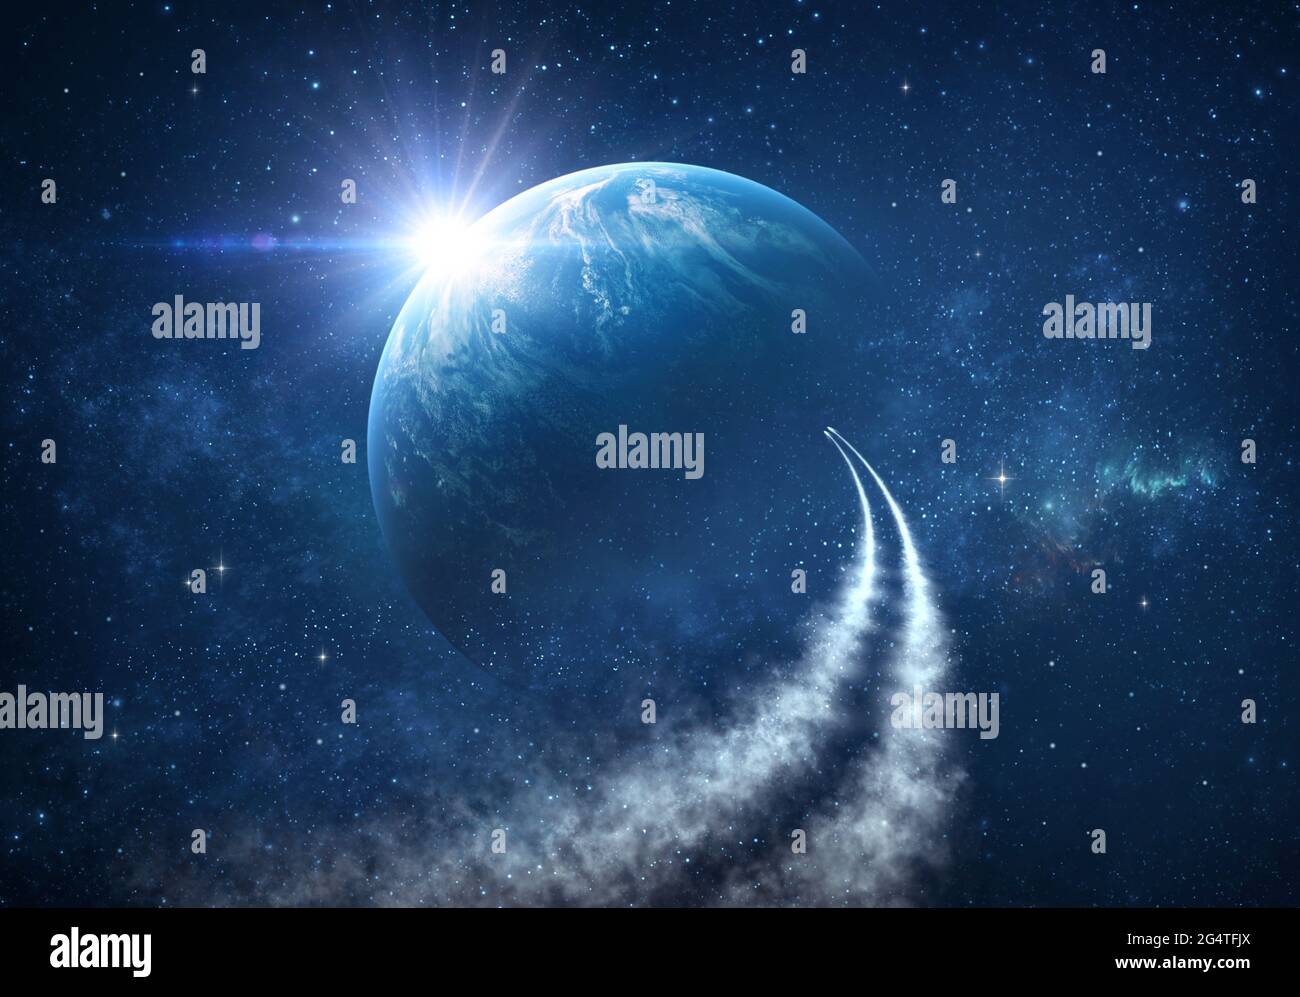 Spaceships traveling into deep space, exploring Universe, stars constellations and nebulas. Comets in outer space reaching planet Earth. Stock Photo